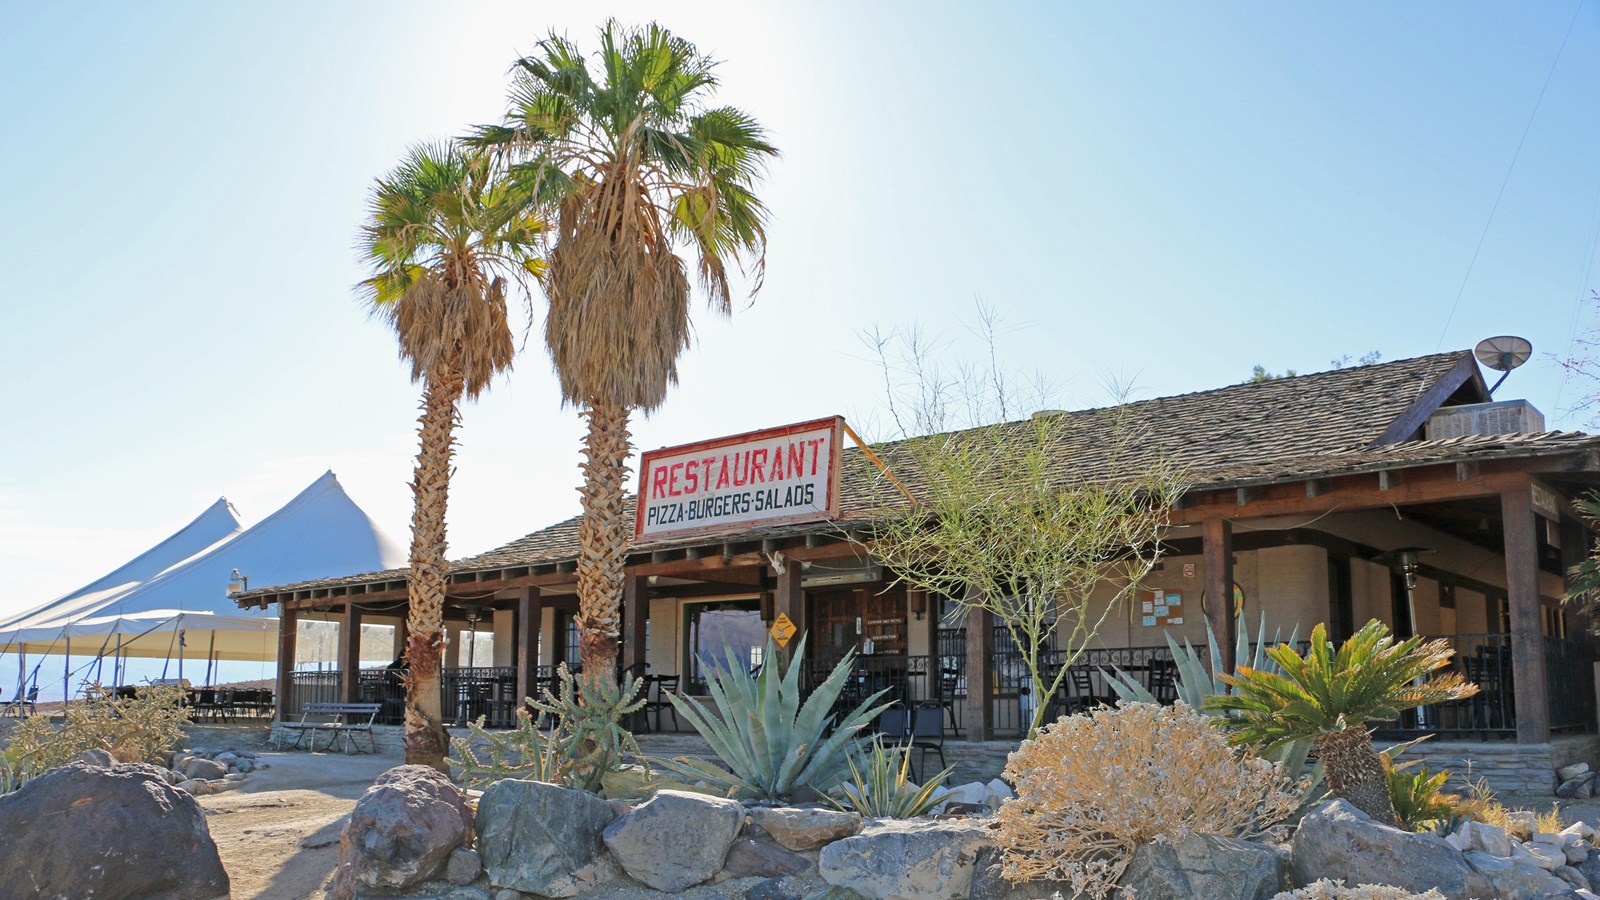 a one story restaurant building with desert plants landscaped around and two palm trees